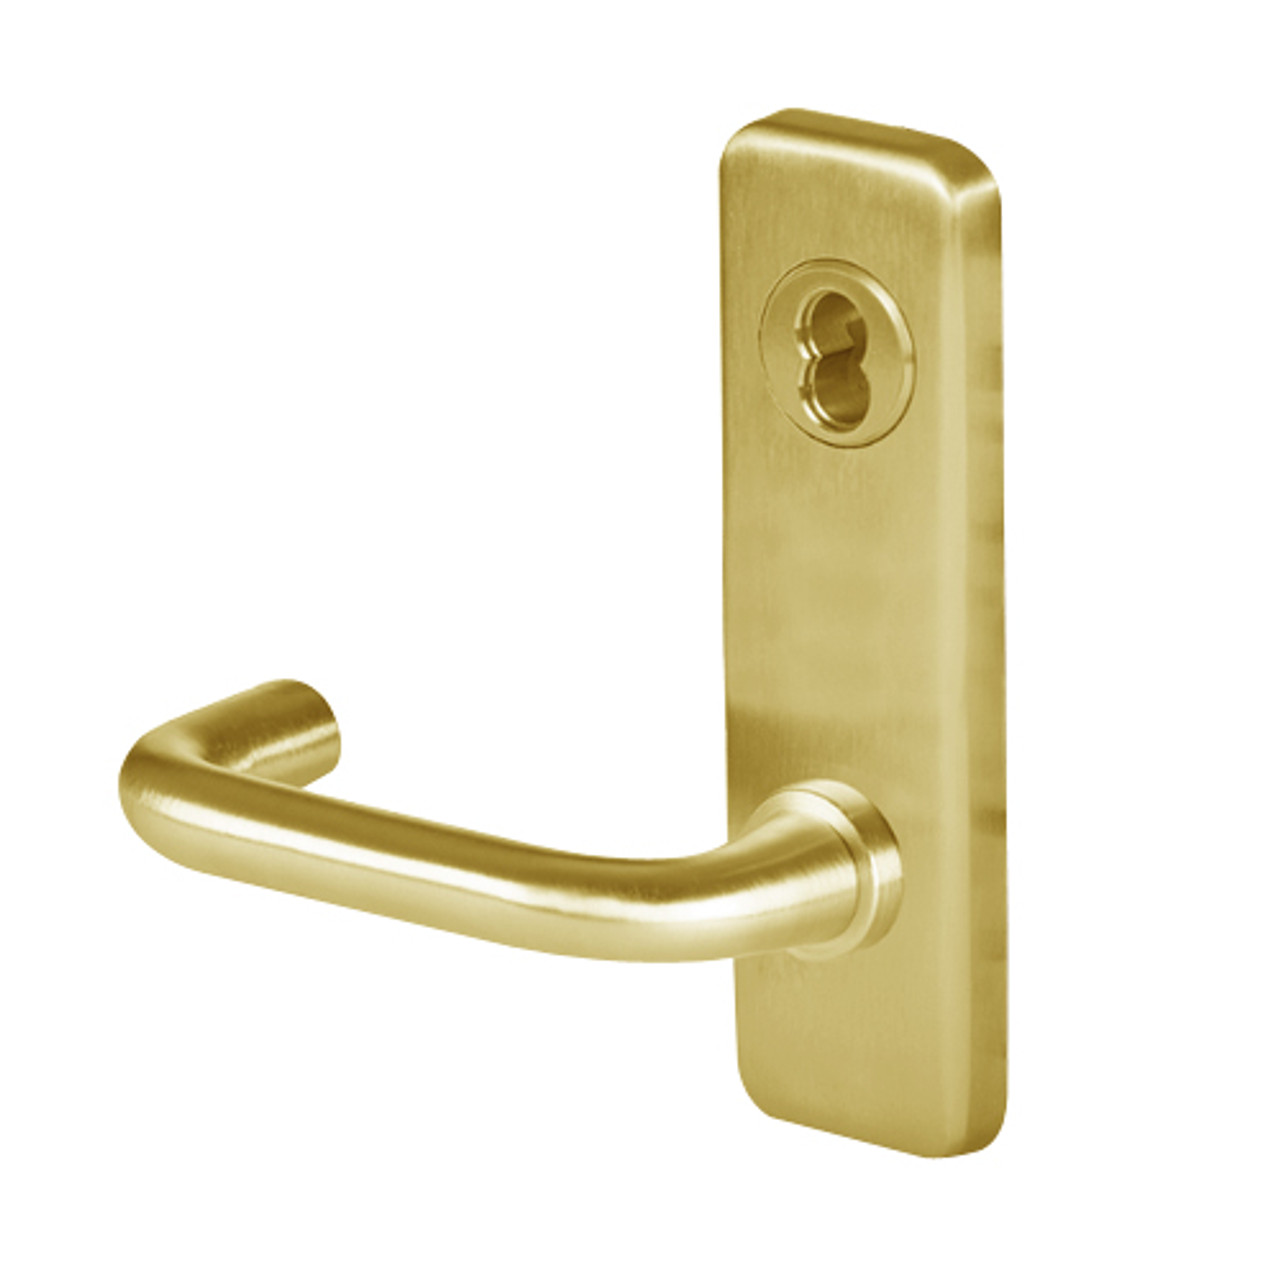 45H7B3J606 Best 40H Series Entrance with Deadbolt Heavy Duty Mortise Lever Lock with Solid Tube Return Style in Satin Brass